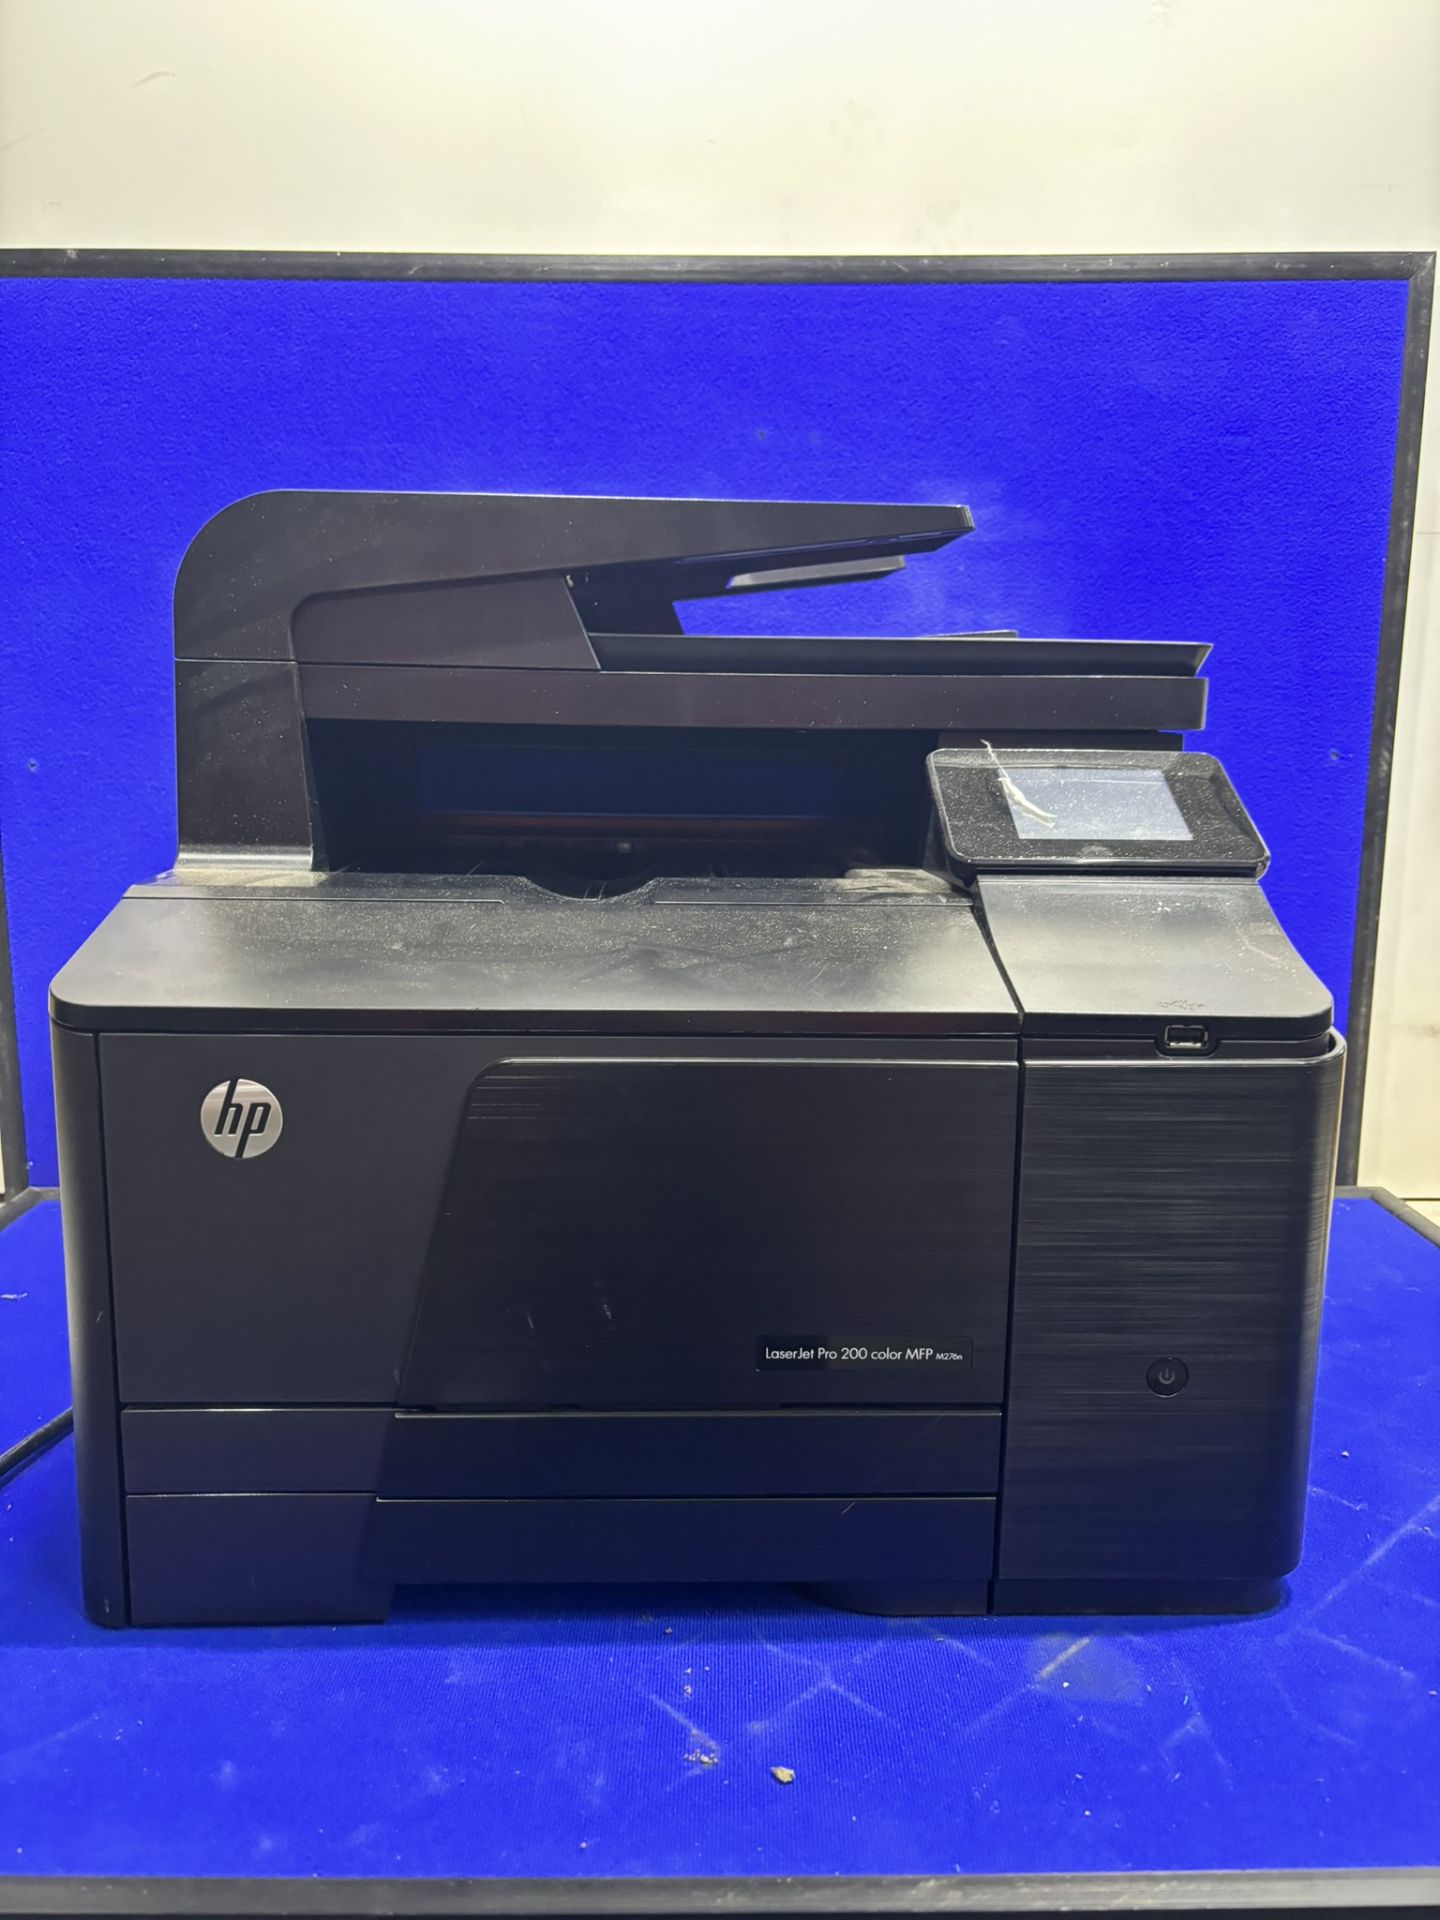 HP Laserjet Pro 200 M276nw All-in-One Color Printer - Image 4 of 12